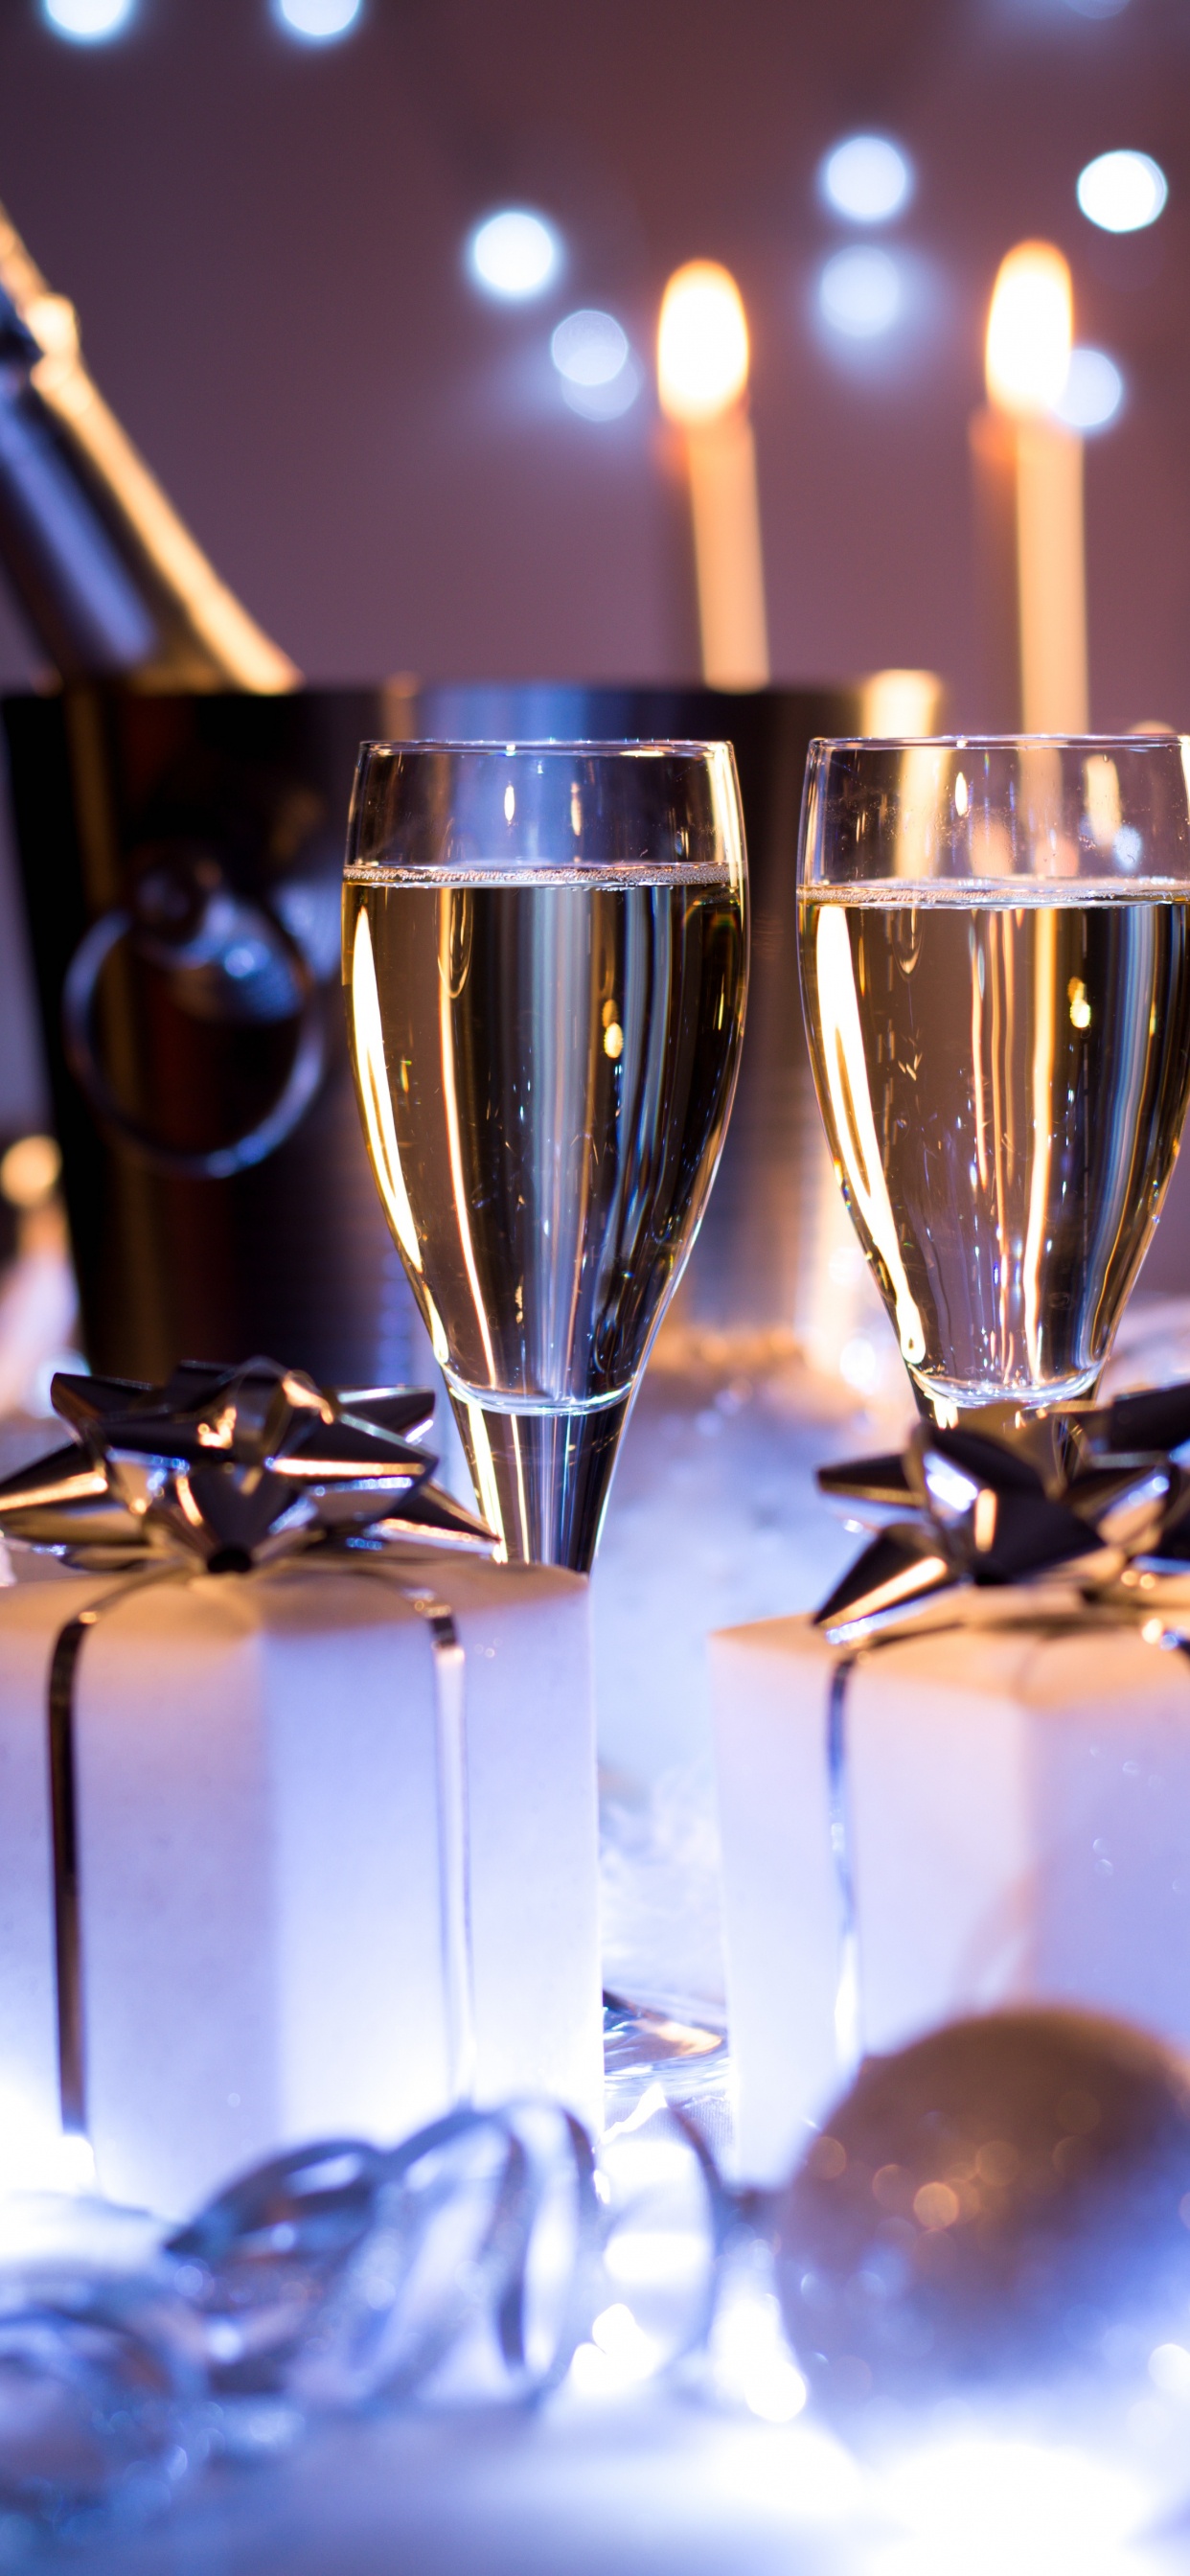 Champagne, Wine, New Years Eve, New Year, Still Life. Wallpaper in 1242x2688 Resolution